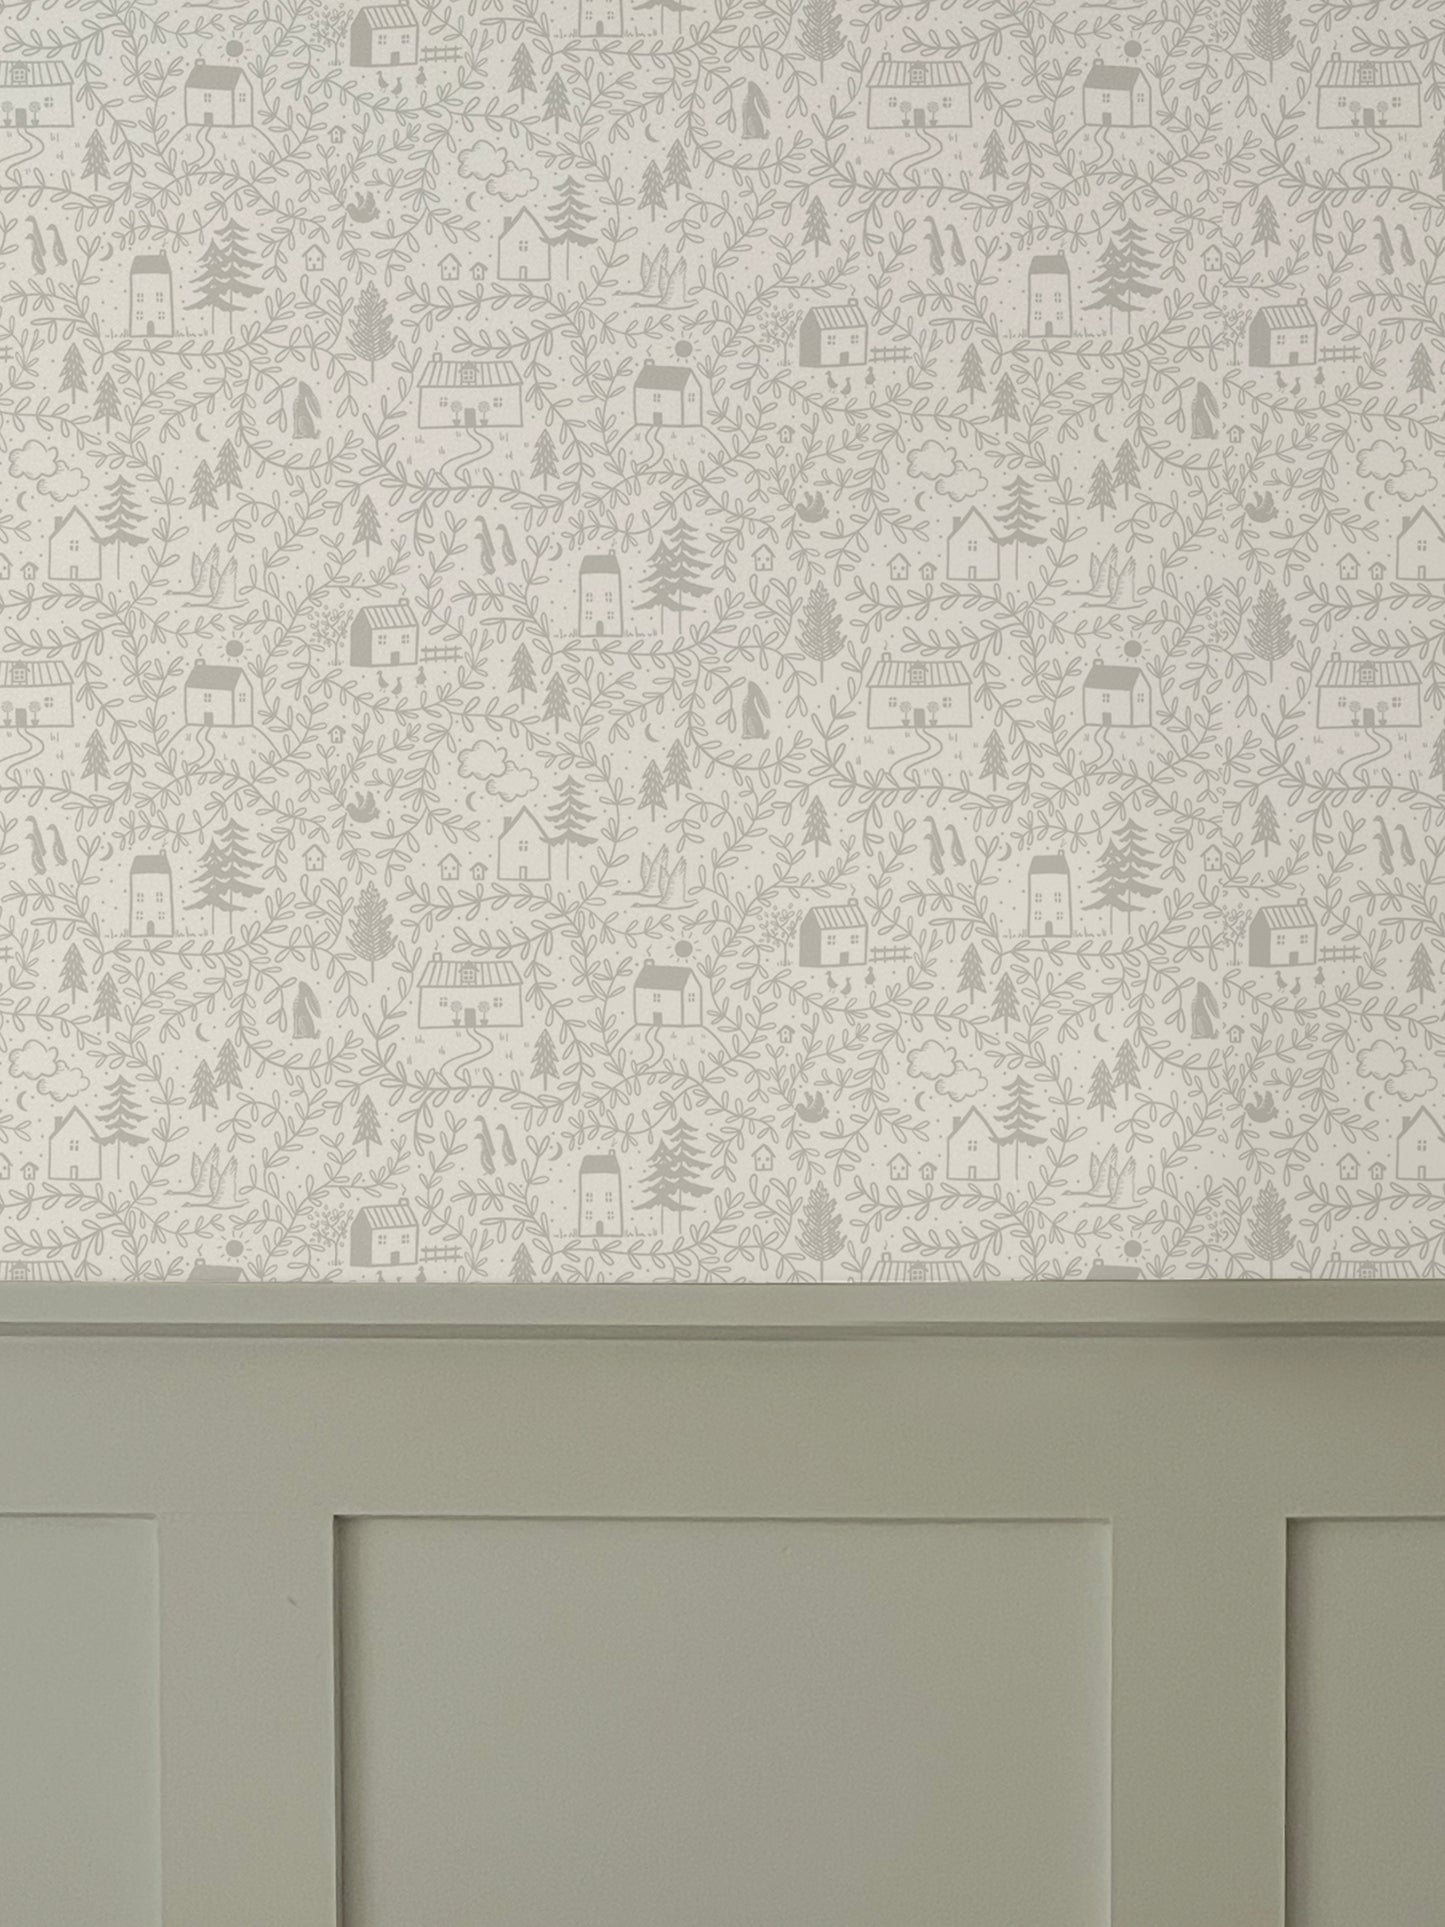 Cottages in the Woods Luxury Children's Wallpaper ~ Pebble